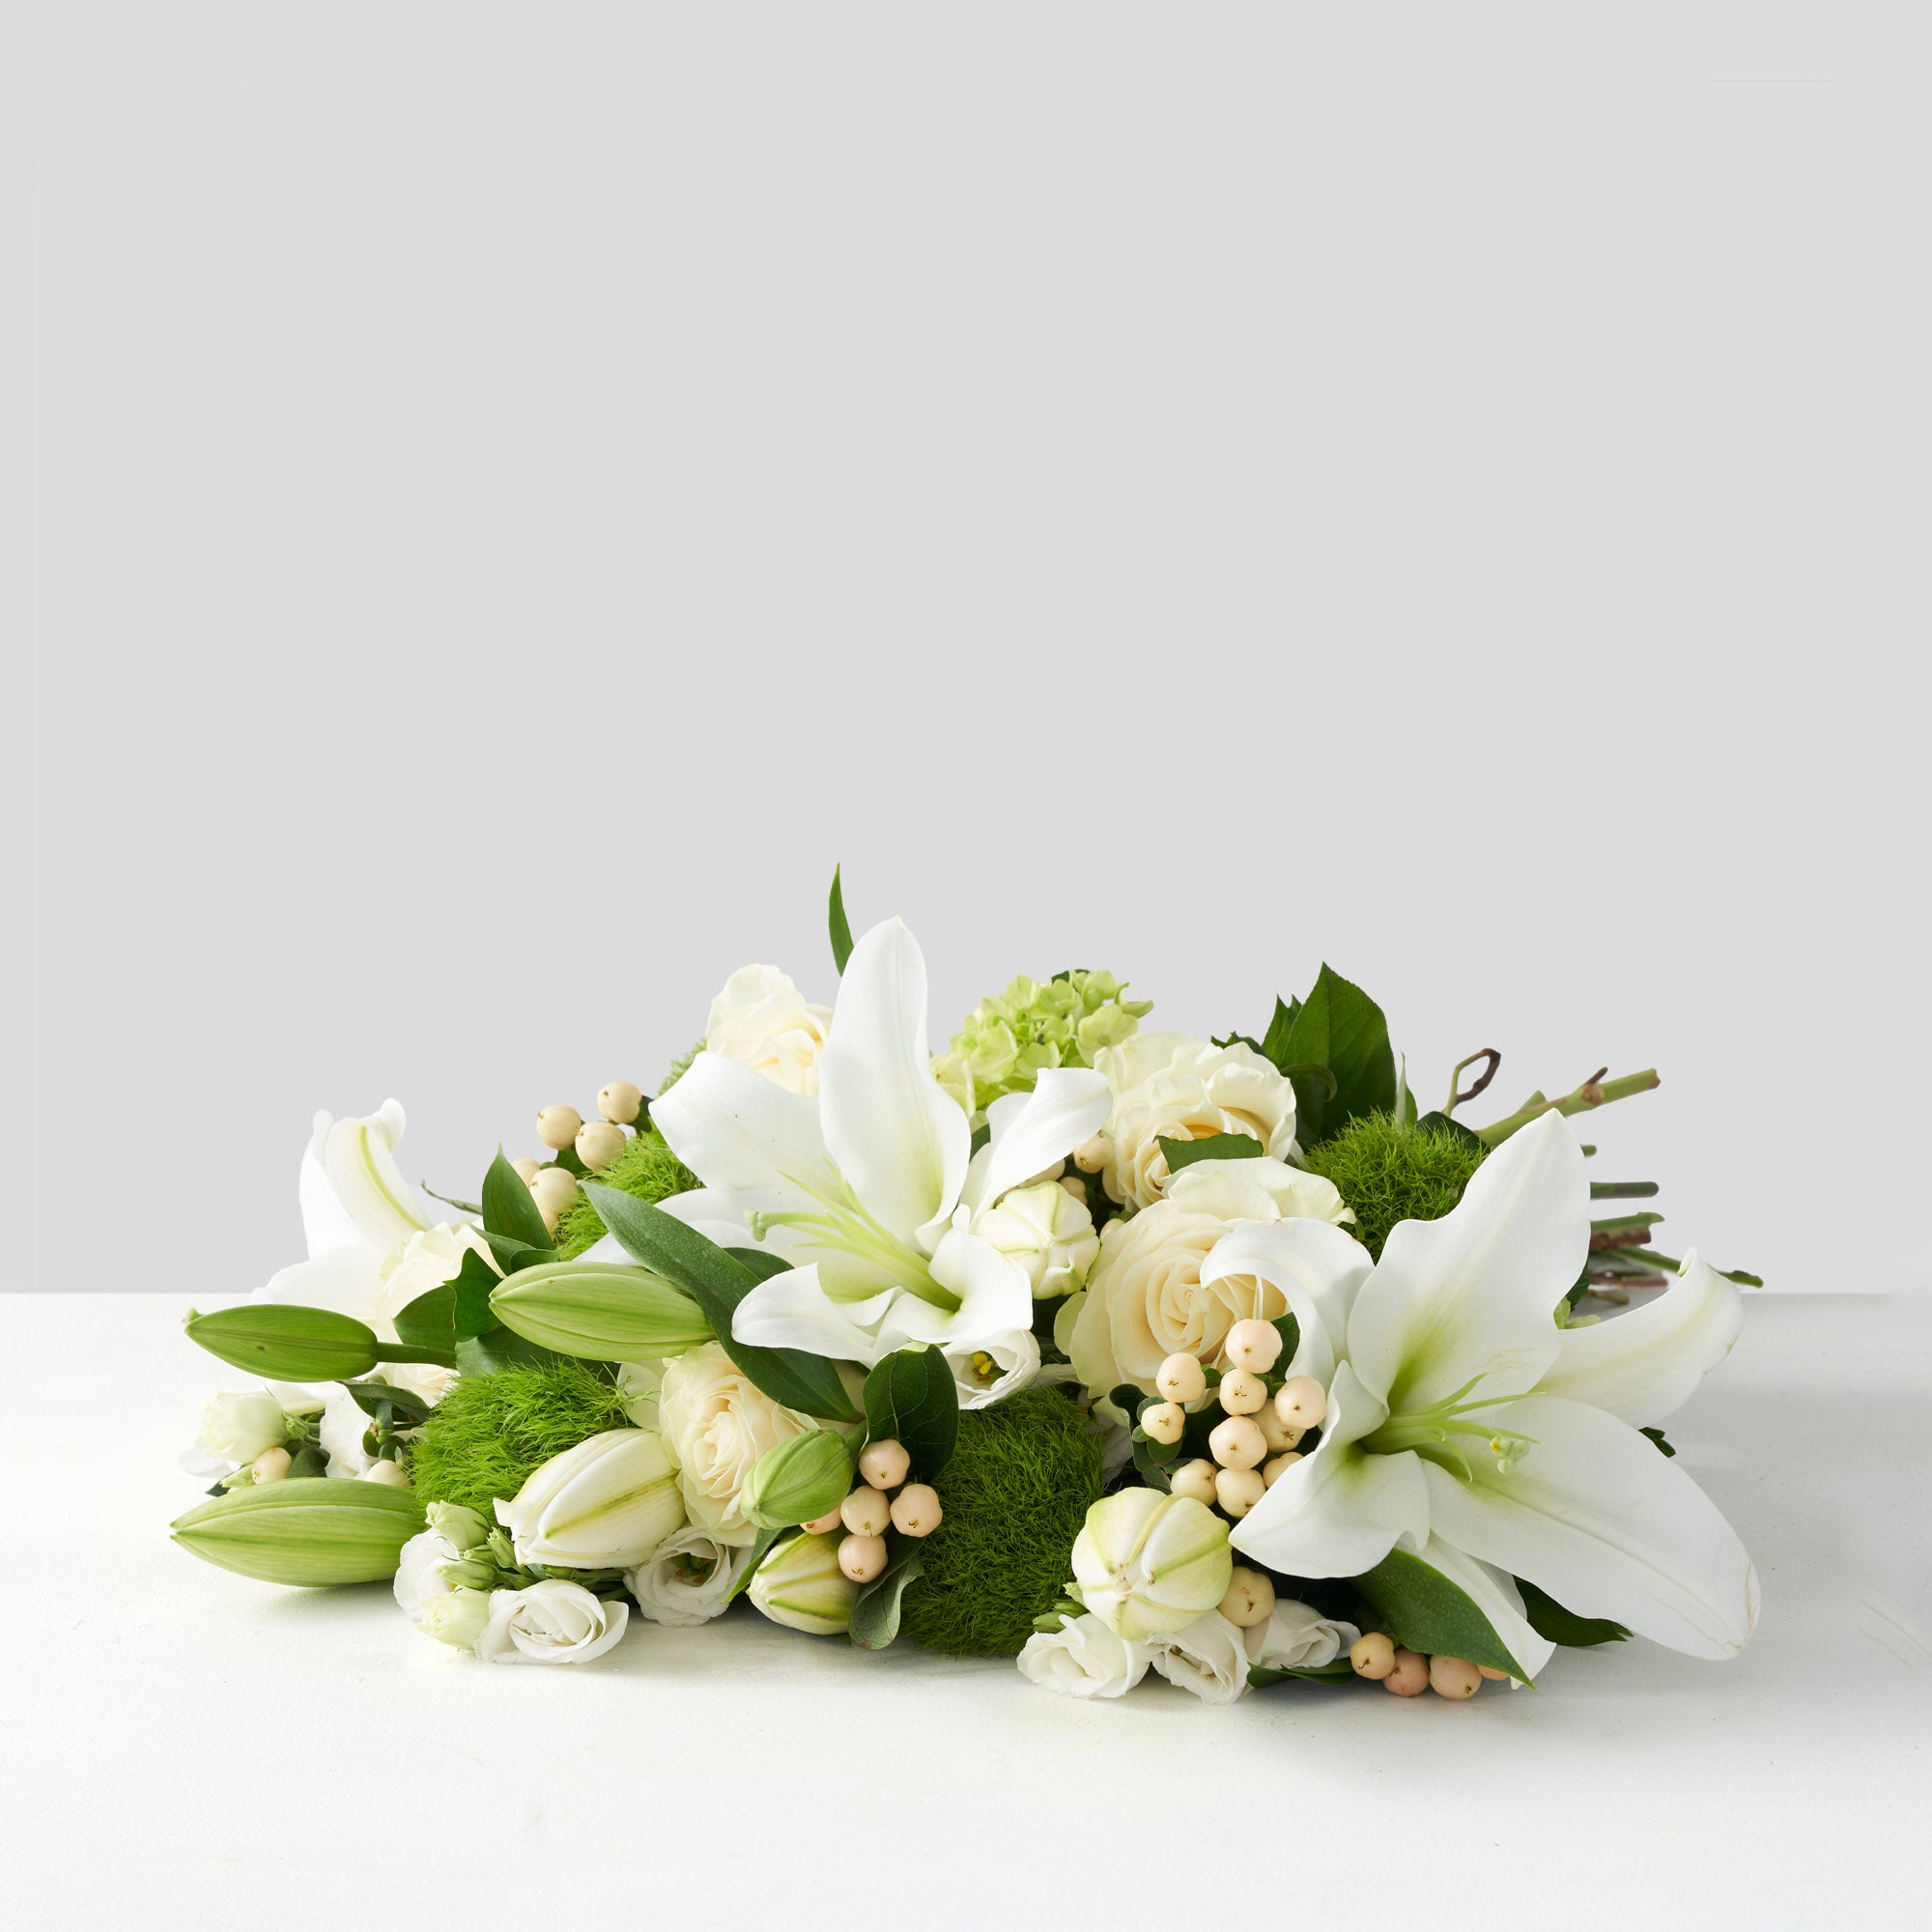 Bouquet of white Mondial roses, white lilies, cream berries and green hydrangea on a white background.